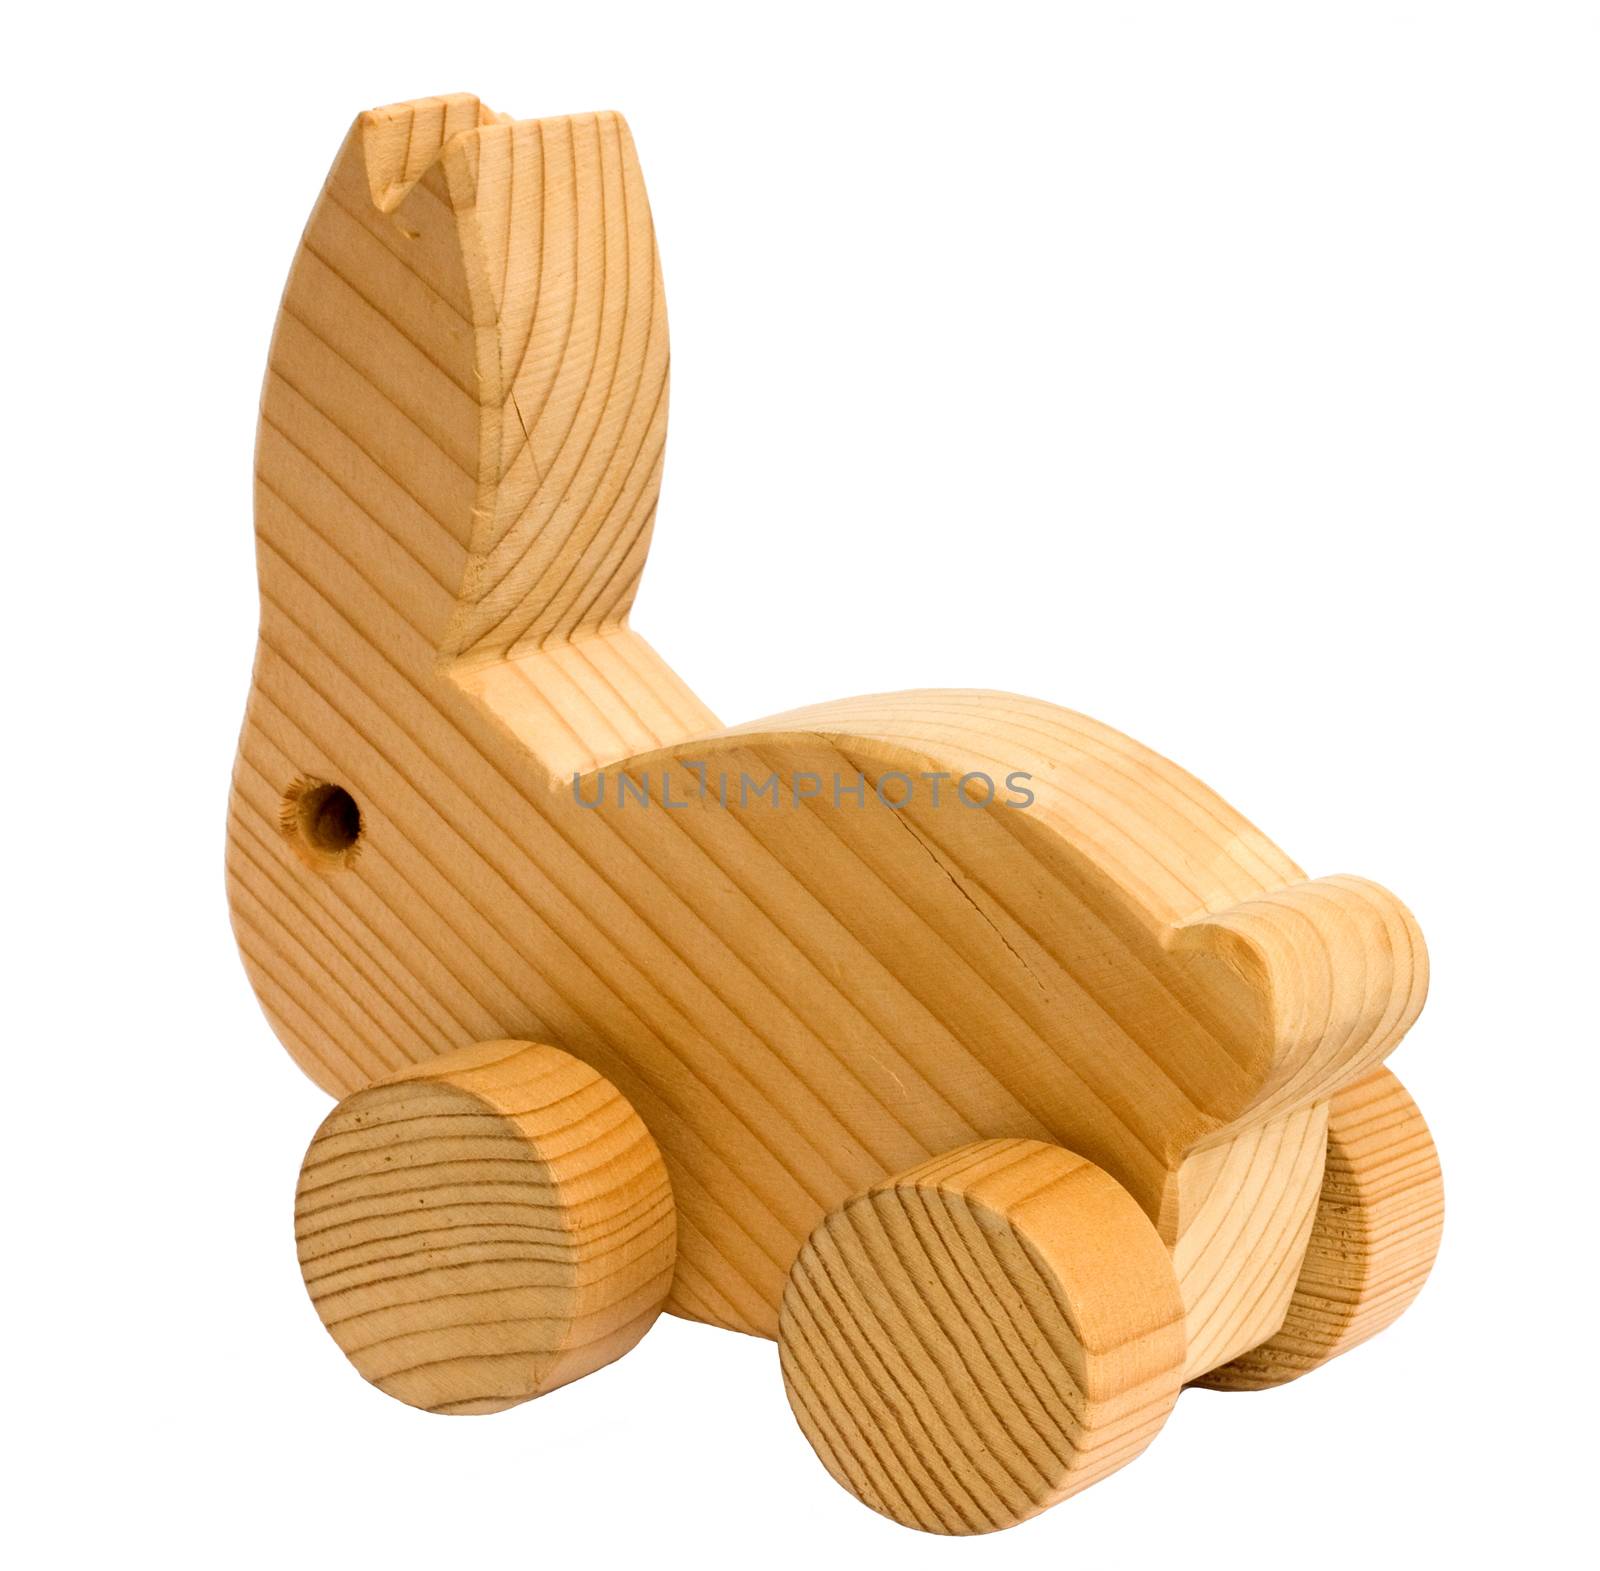 Vintage wooden toy rabbit by kavring